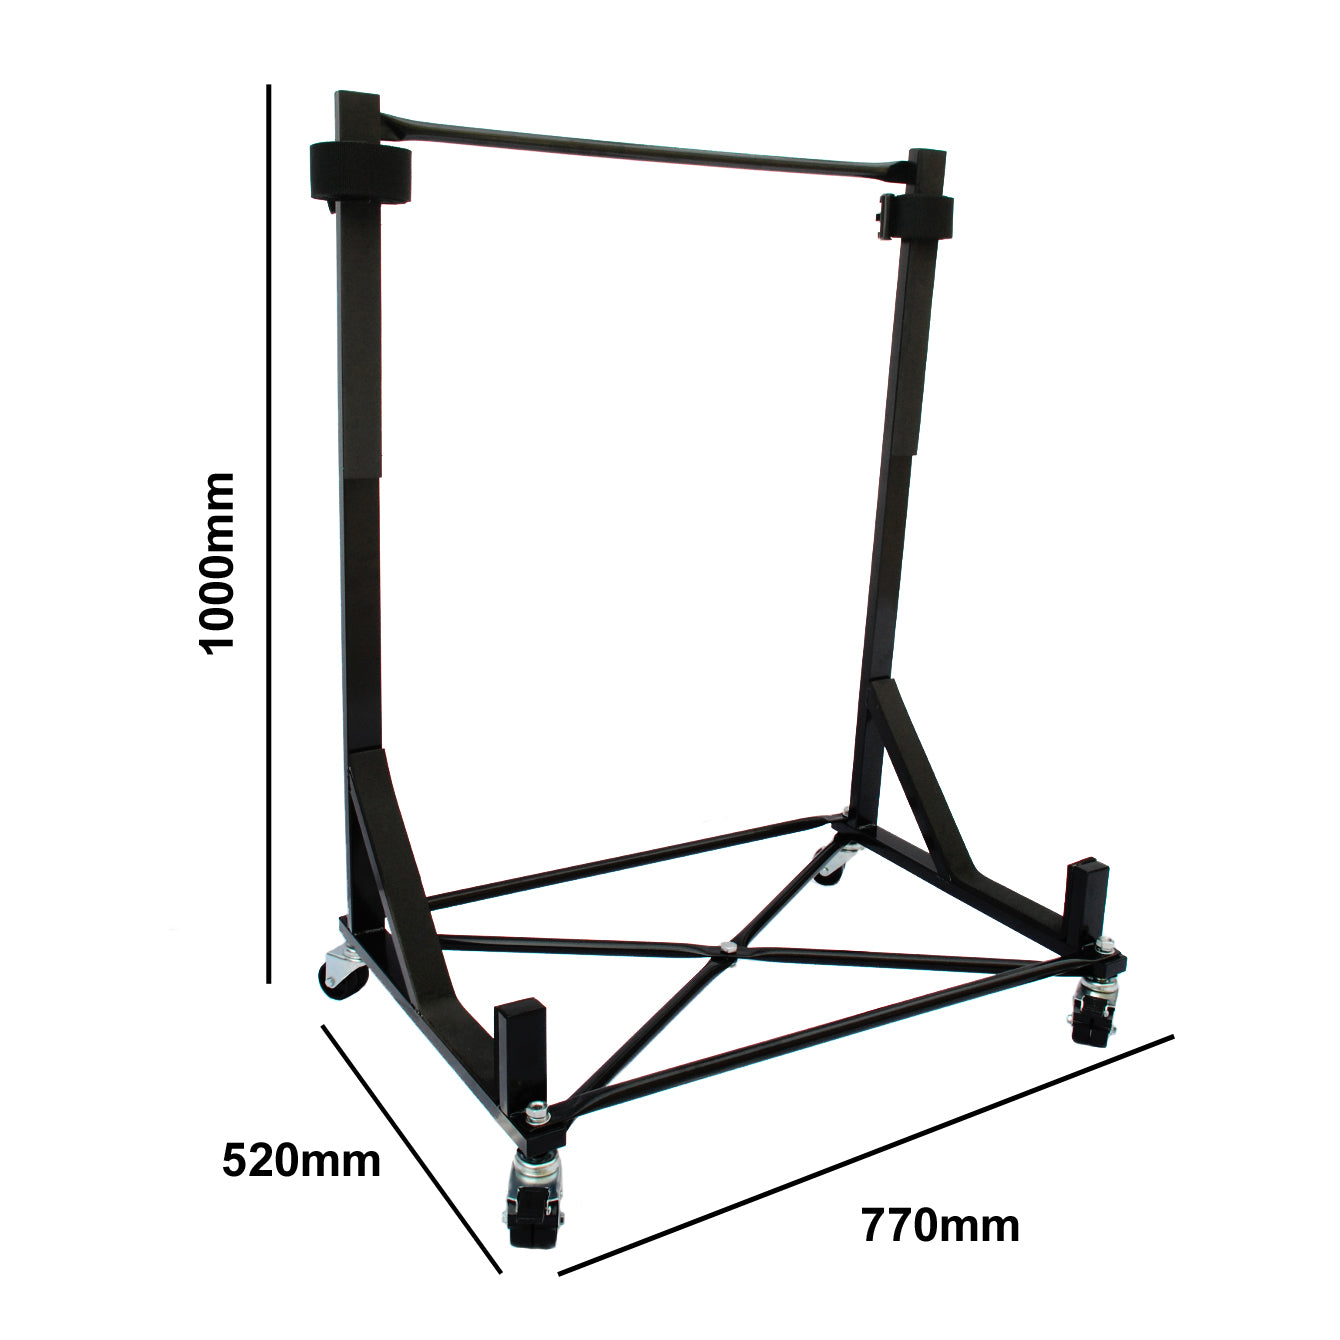 Heavy-duty Hardtop Stand Storage Rack (Black) with Securing Harness - FACTORY SECOND (050Bx)